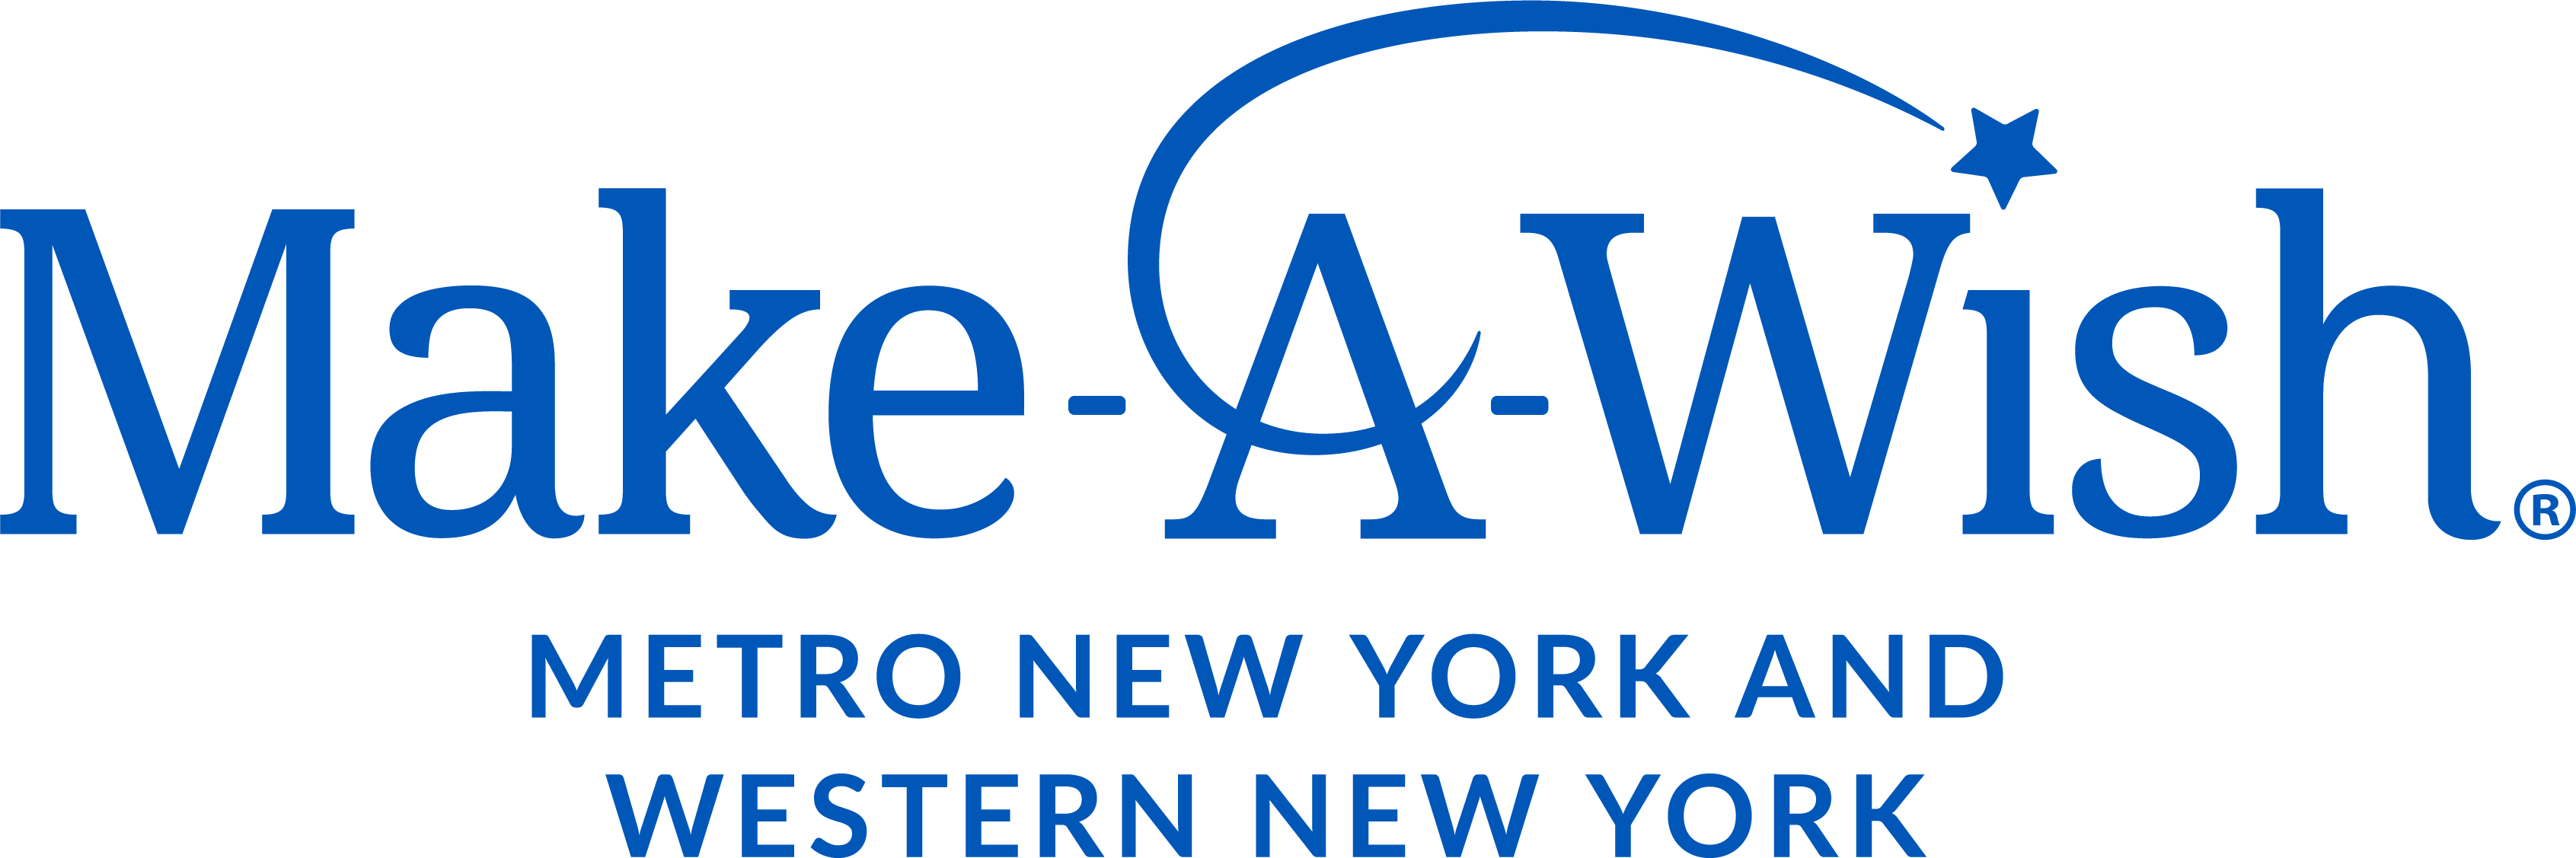 MAKE-A-WISH FOUNDATION OF METRO NEW YORK AND WESTERN NEW YORK